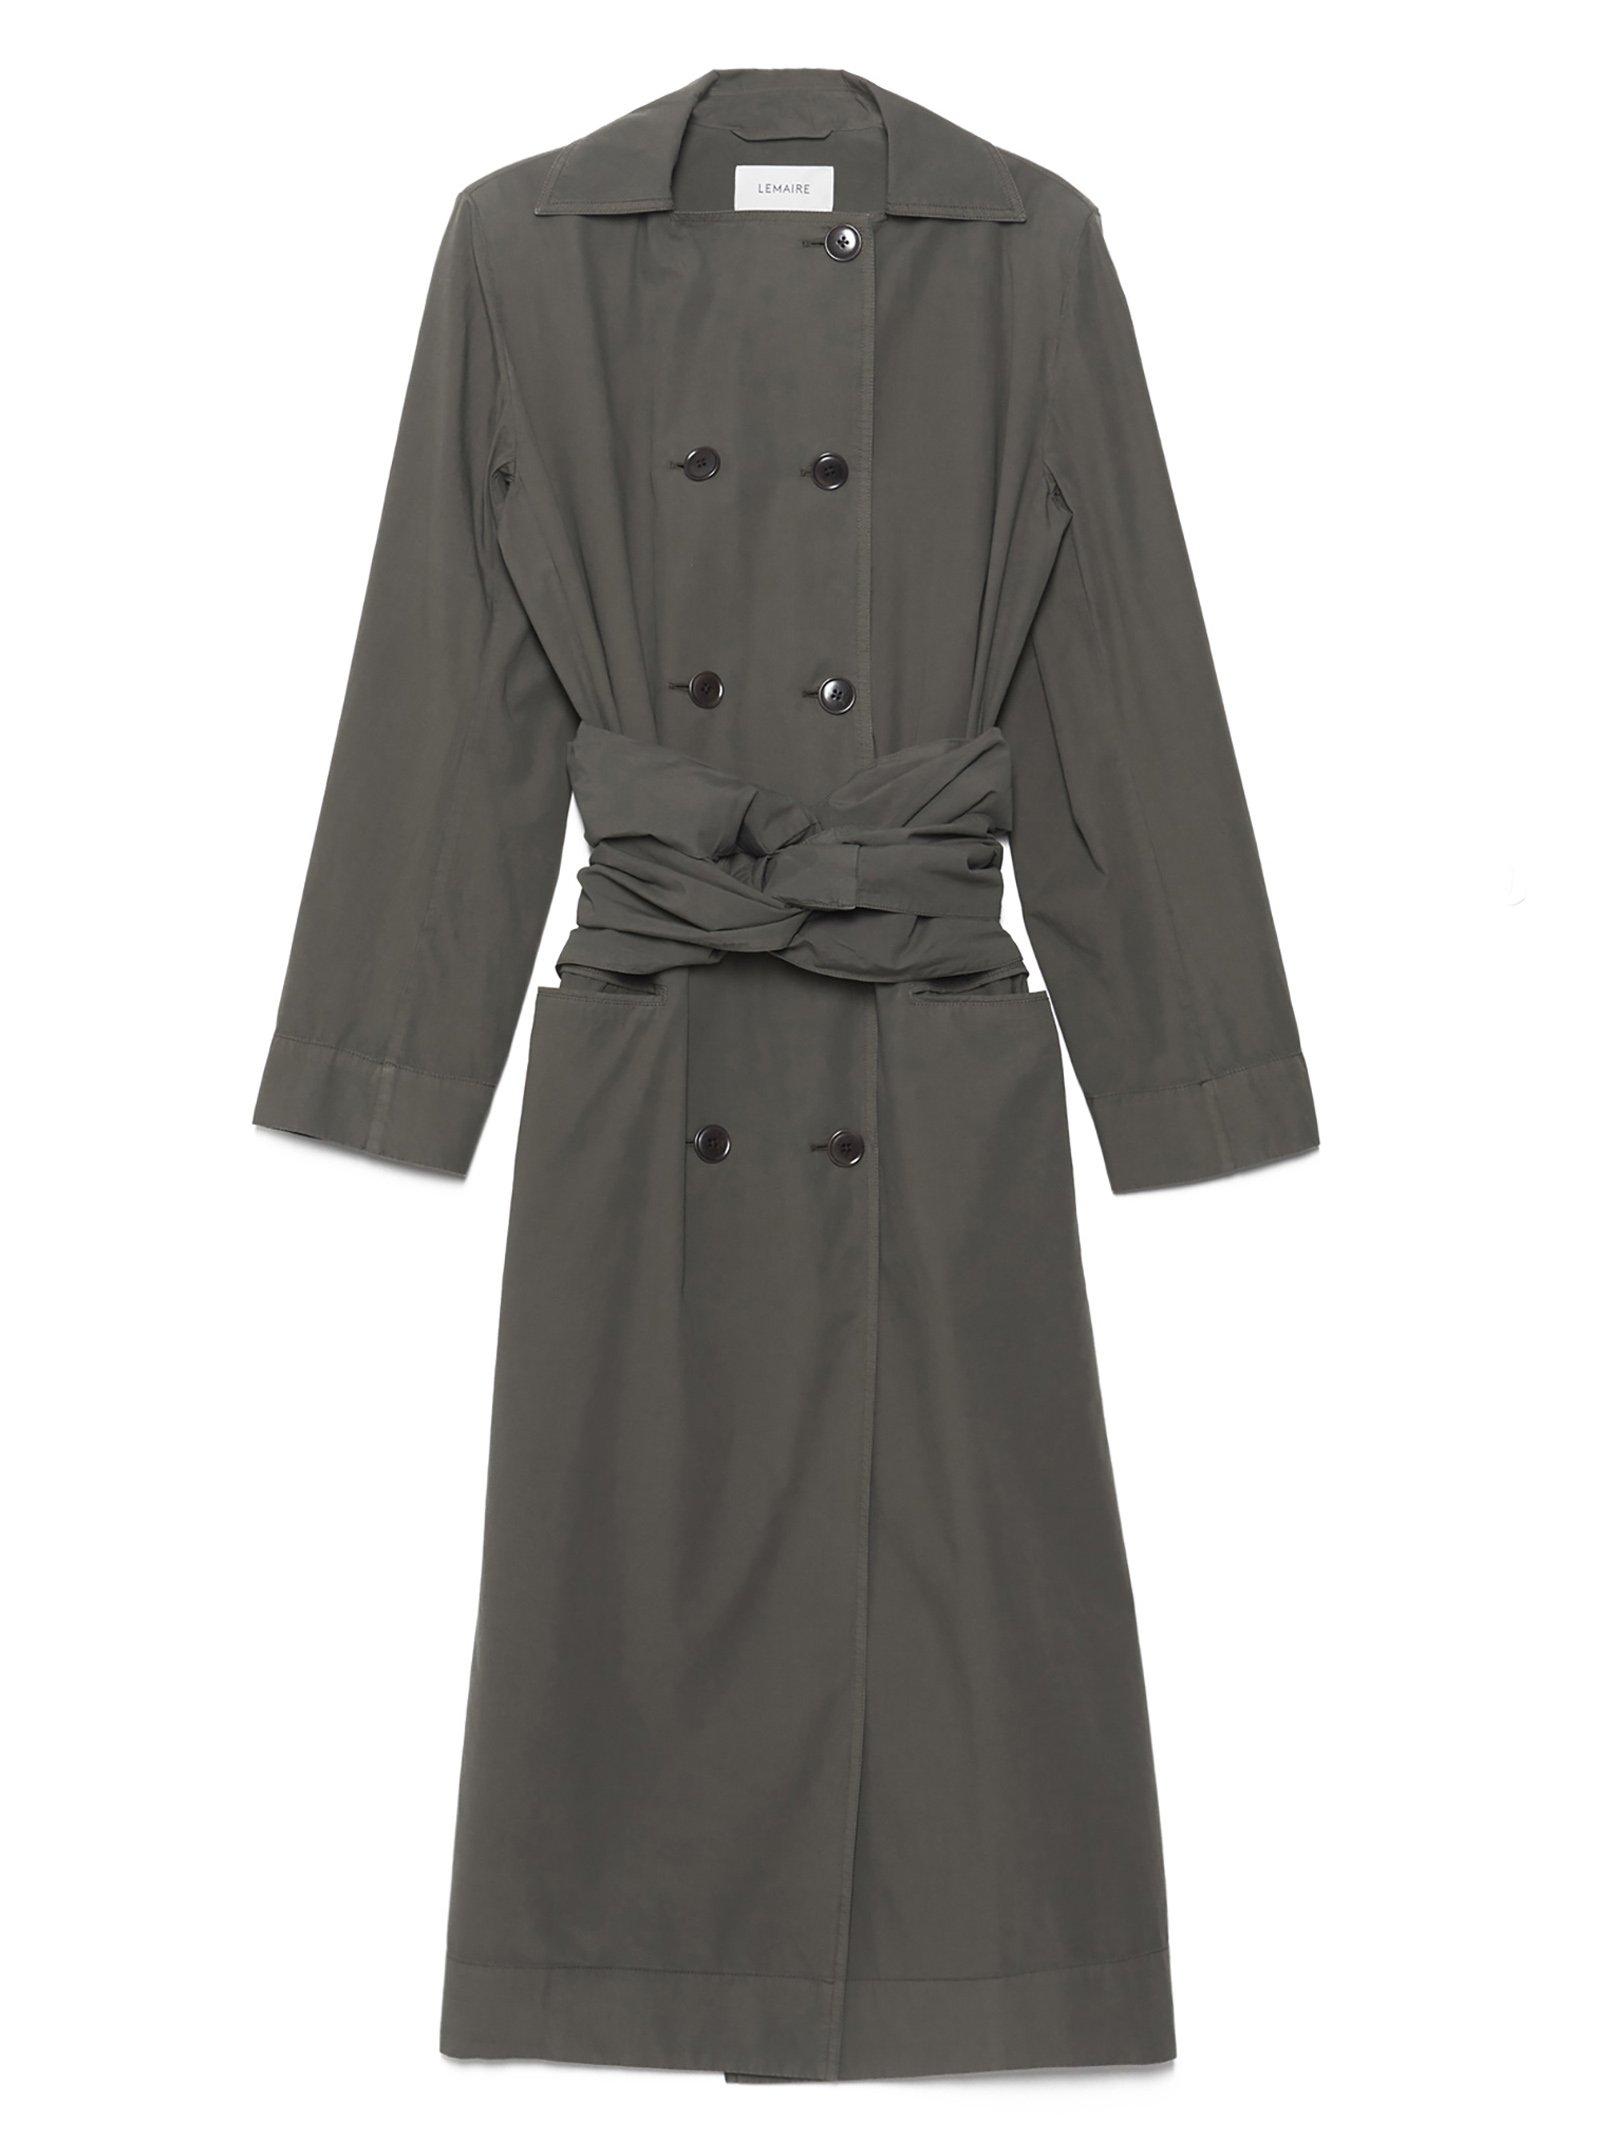 Lemaire Cotton Belted Trench Coat in Green - Lyst